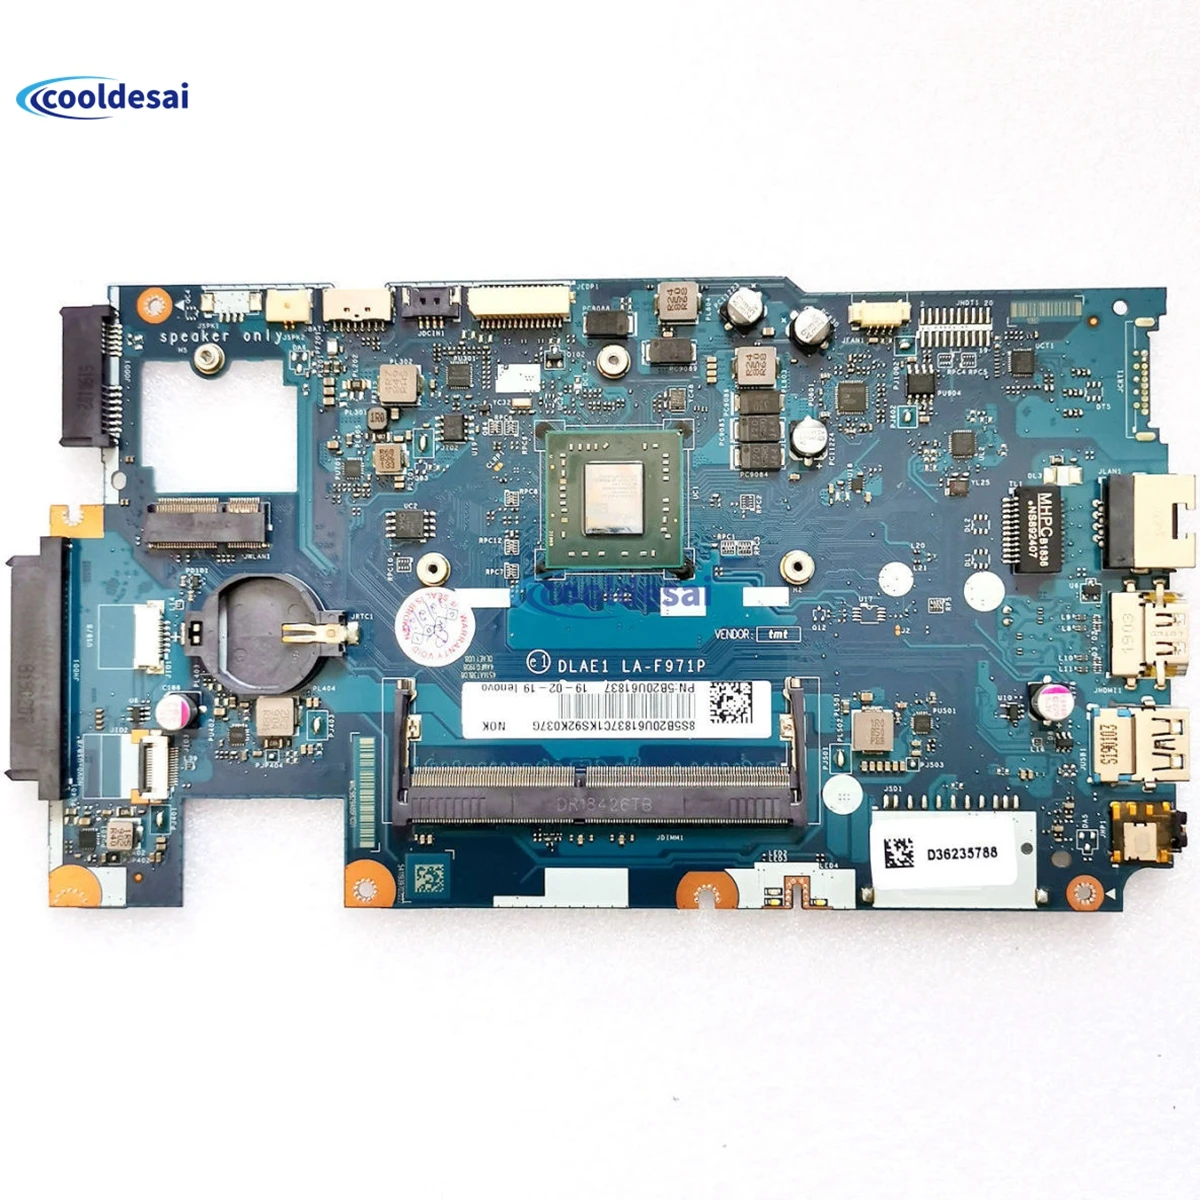 

NEW 5B20U61837 for Lenovo E41-25 Laptop motherboard E41-25 Motherboard LA-F971P motherboard With A4-4350 CPU DDR4 100% test OK